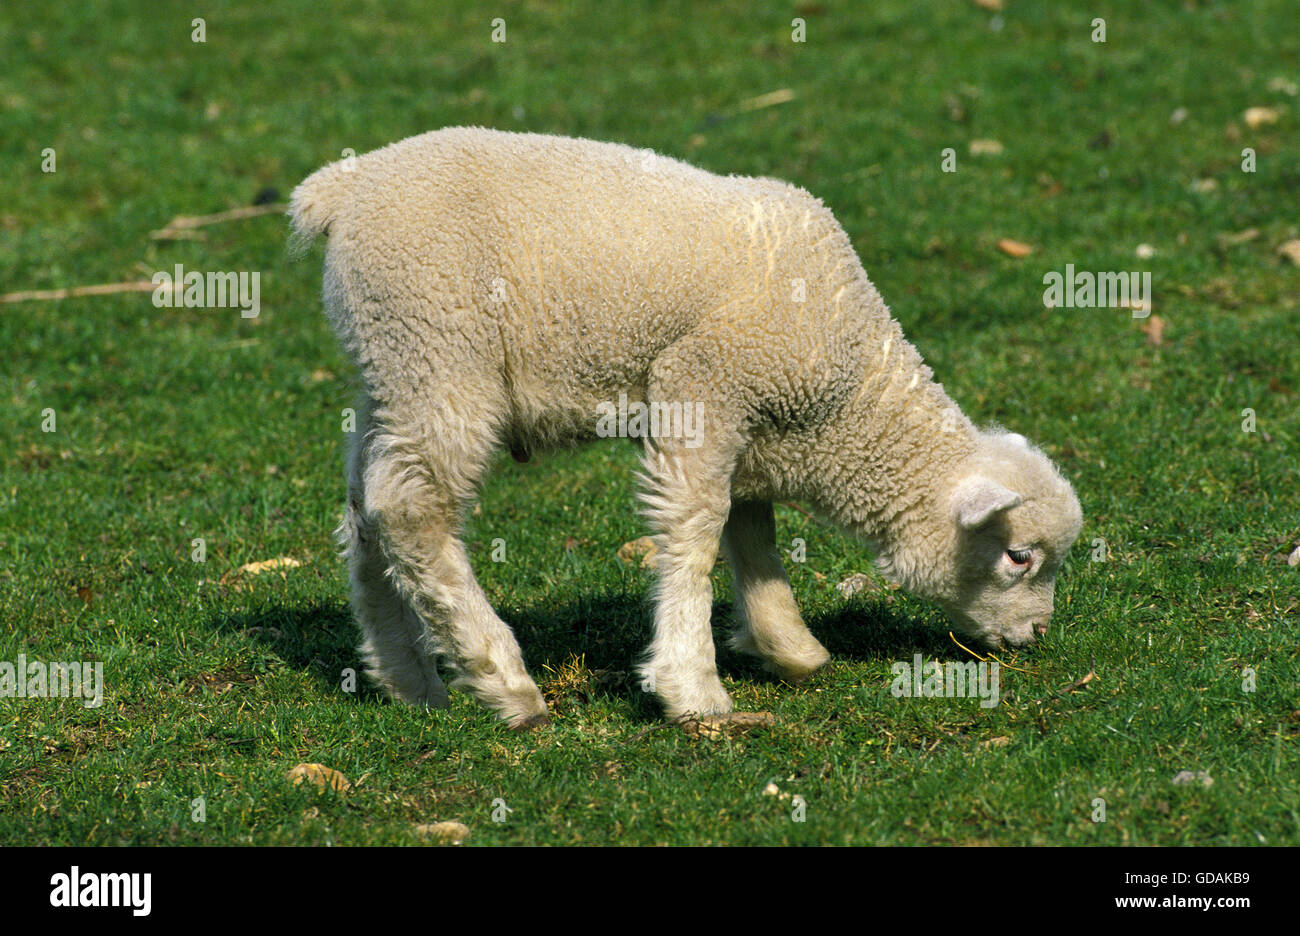 Ile de France Domestic Sheep, a French Breed, Lamb eating Grass Stock Photo